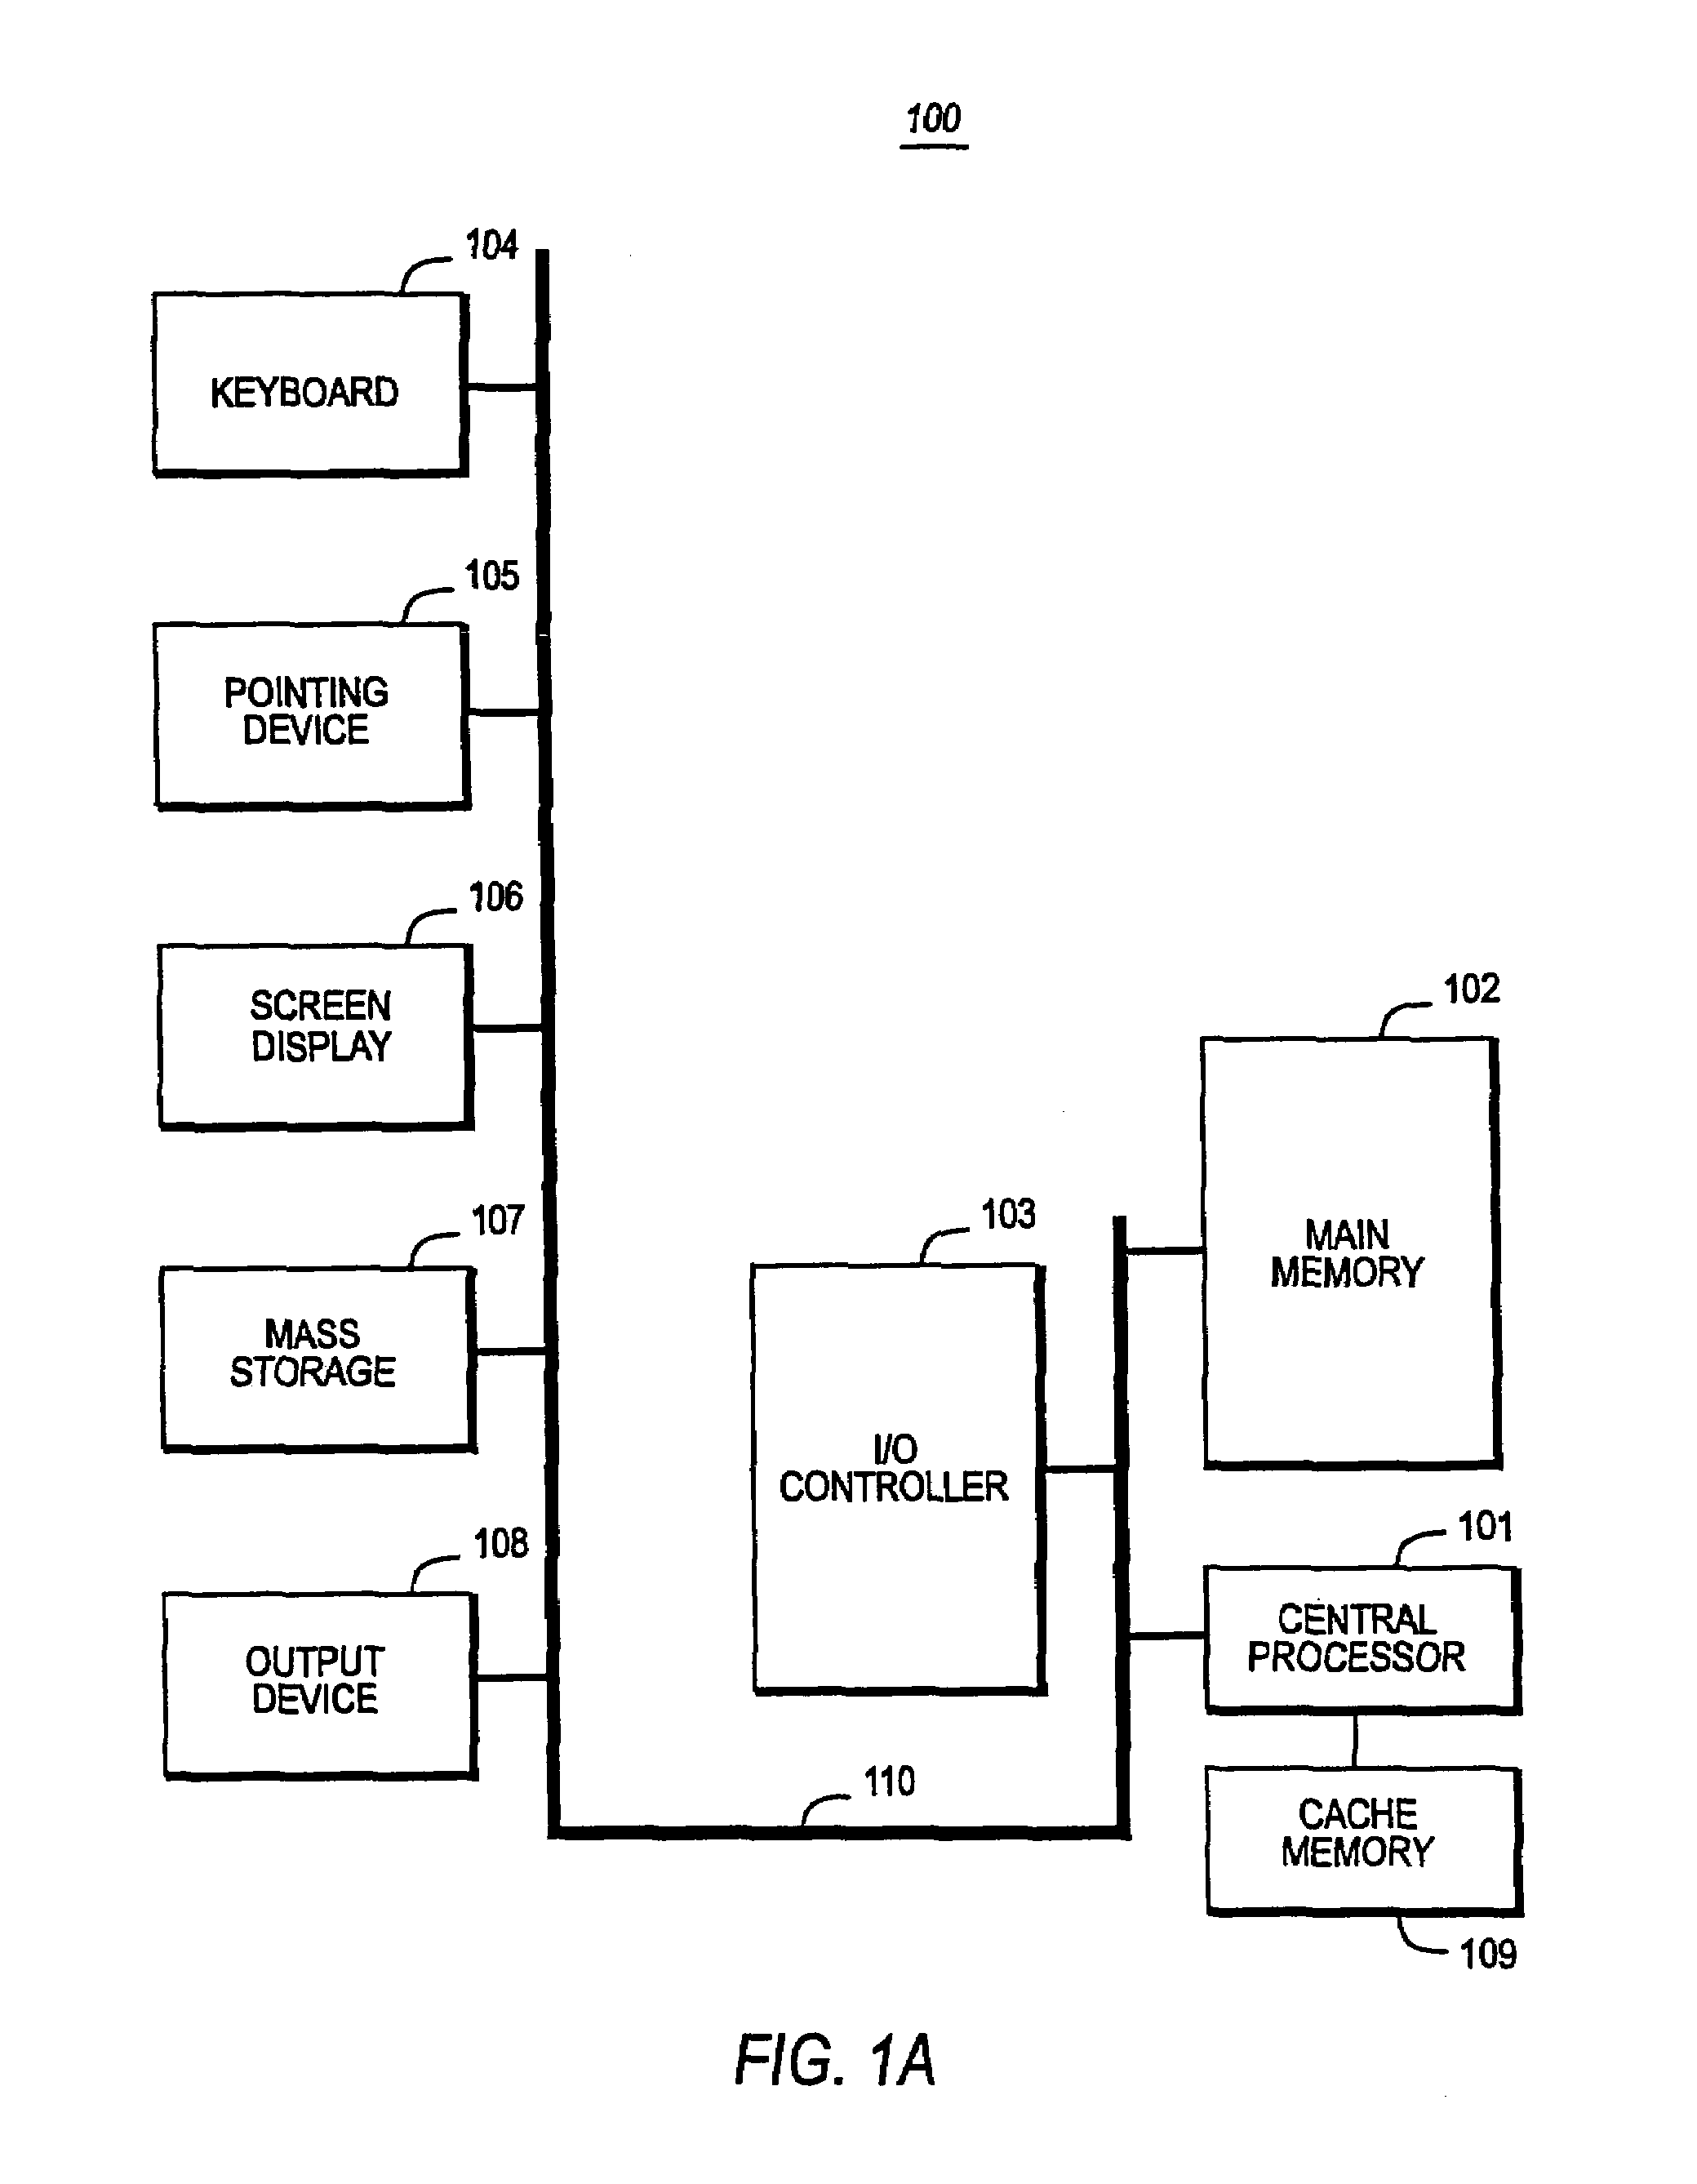 System and methods for scheduling and tracking events across multiple time zones